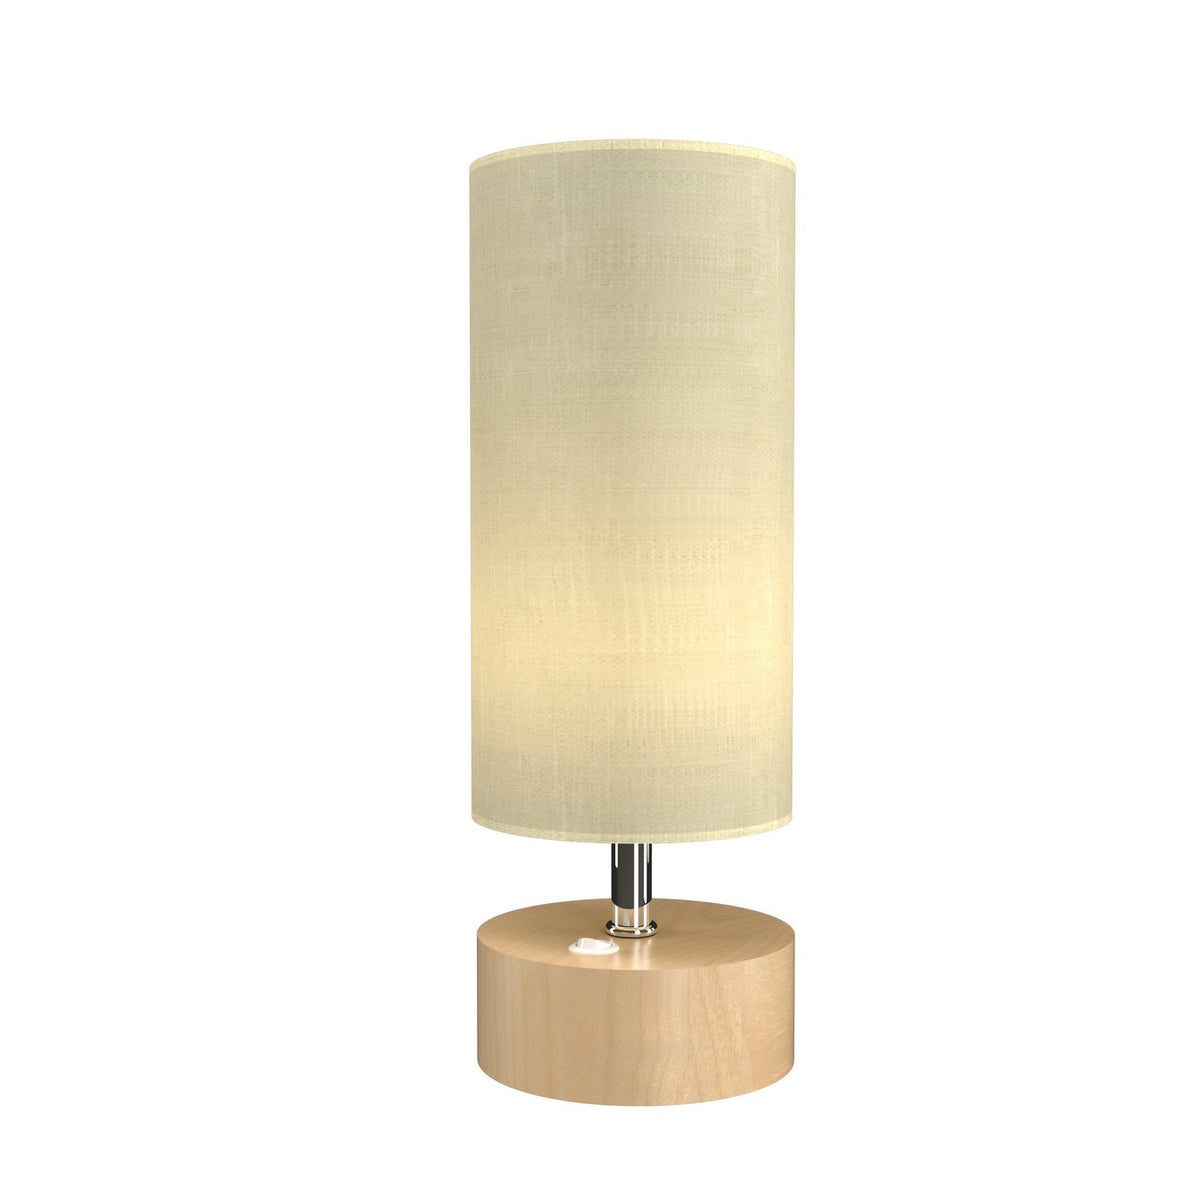 Accord Lighting - 7100.34 - LED Table Lamp - Clean - Maple